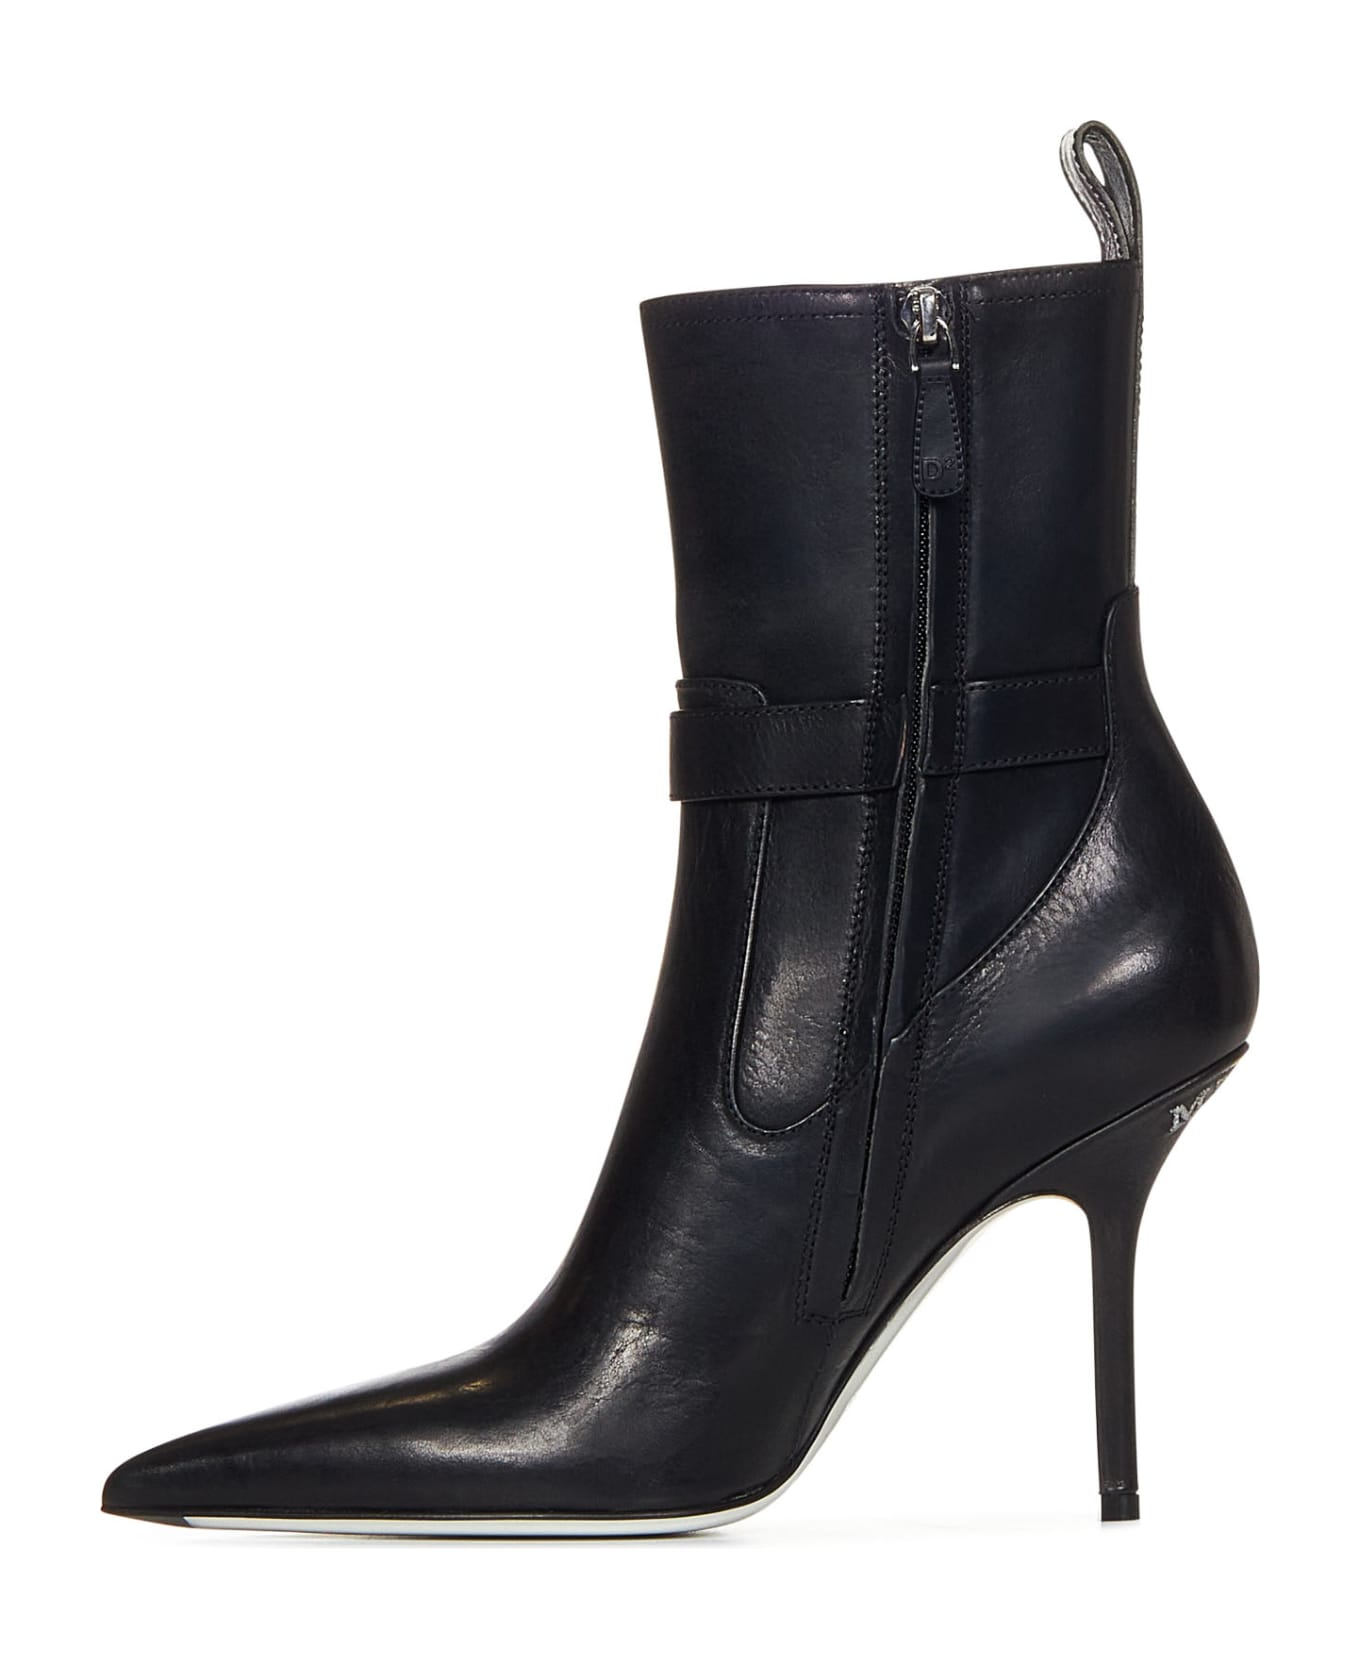 Dsquared2 Rodeo Girl Heeled Ankle Boots - Black